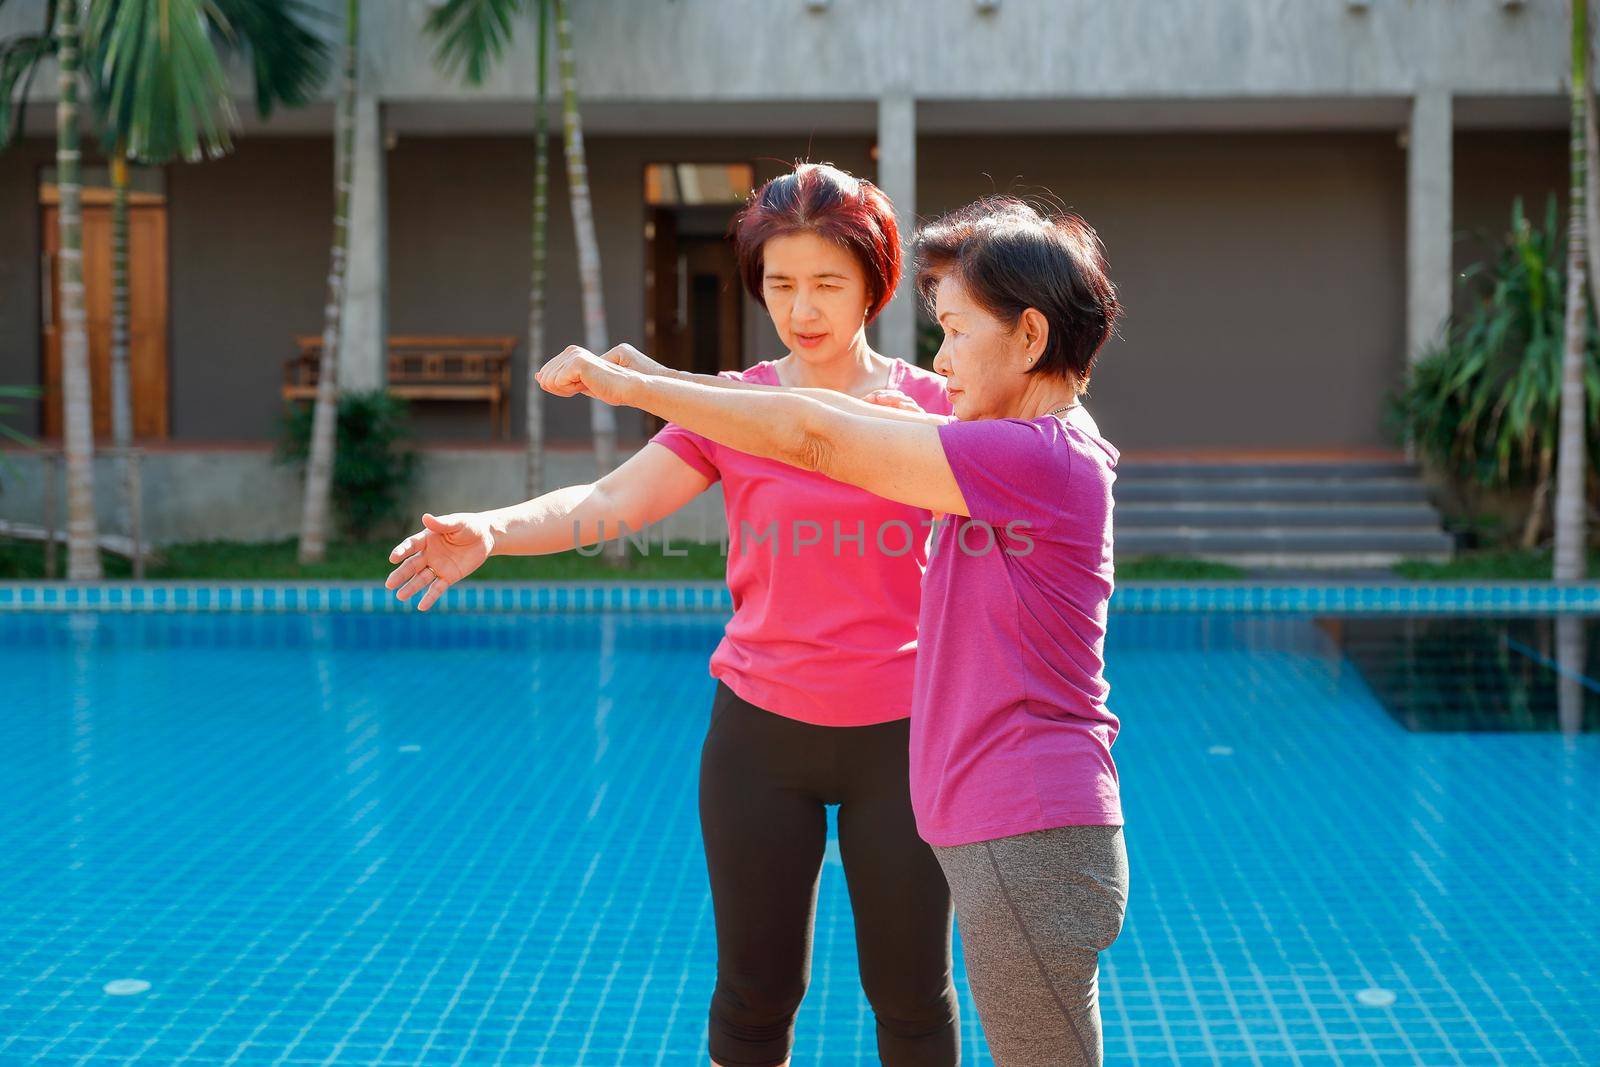 elderly woman doing exercise with daughter at pool patio